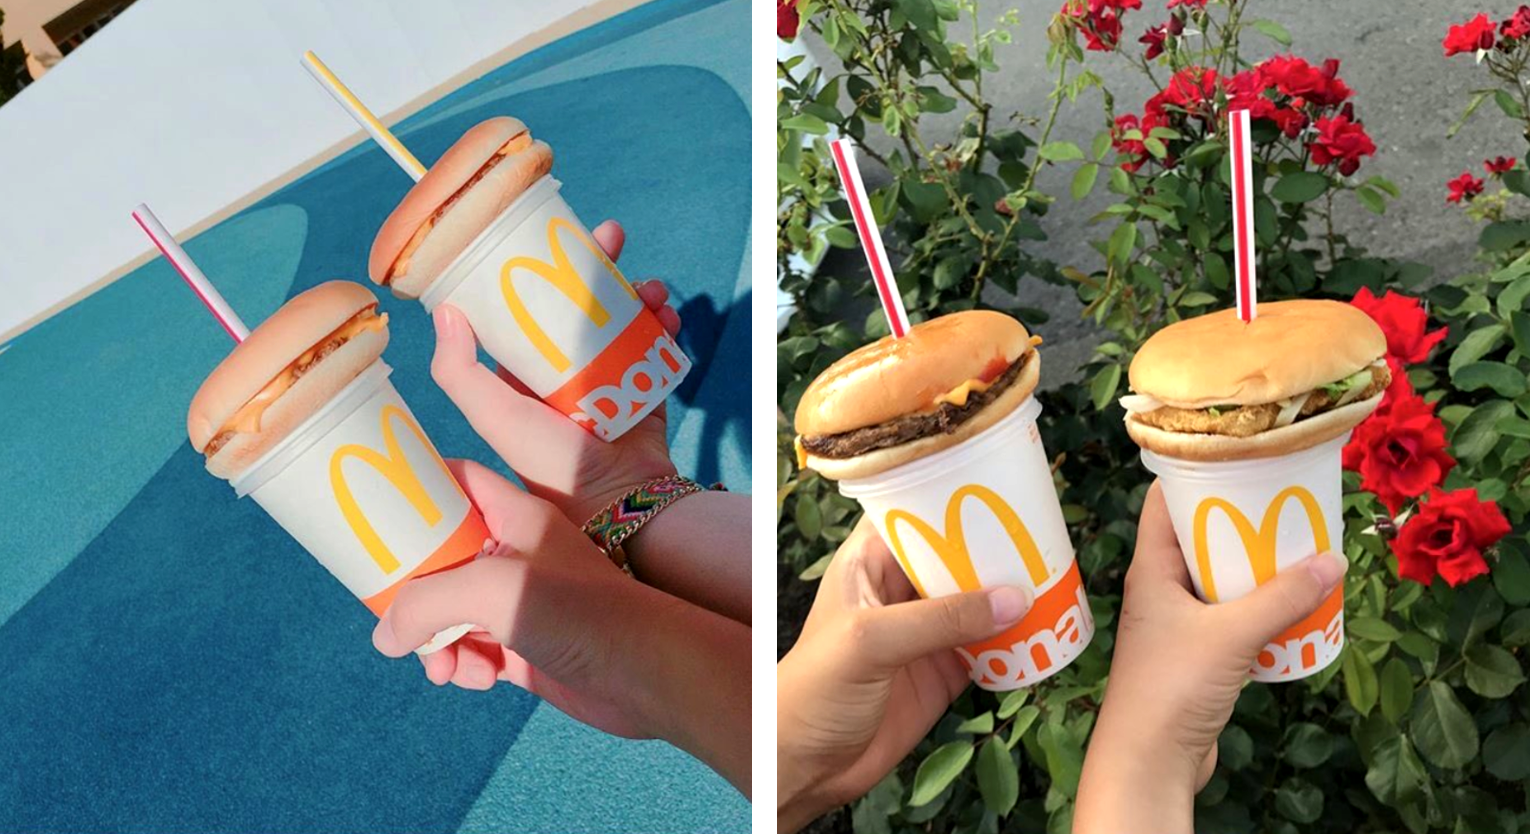 Why Japanese People Are Sticking Their McDonald’s Burgers on Top of Their Drinks